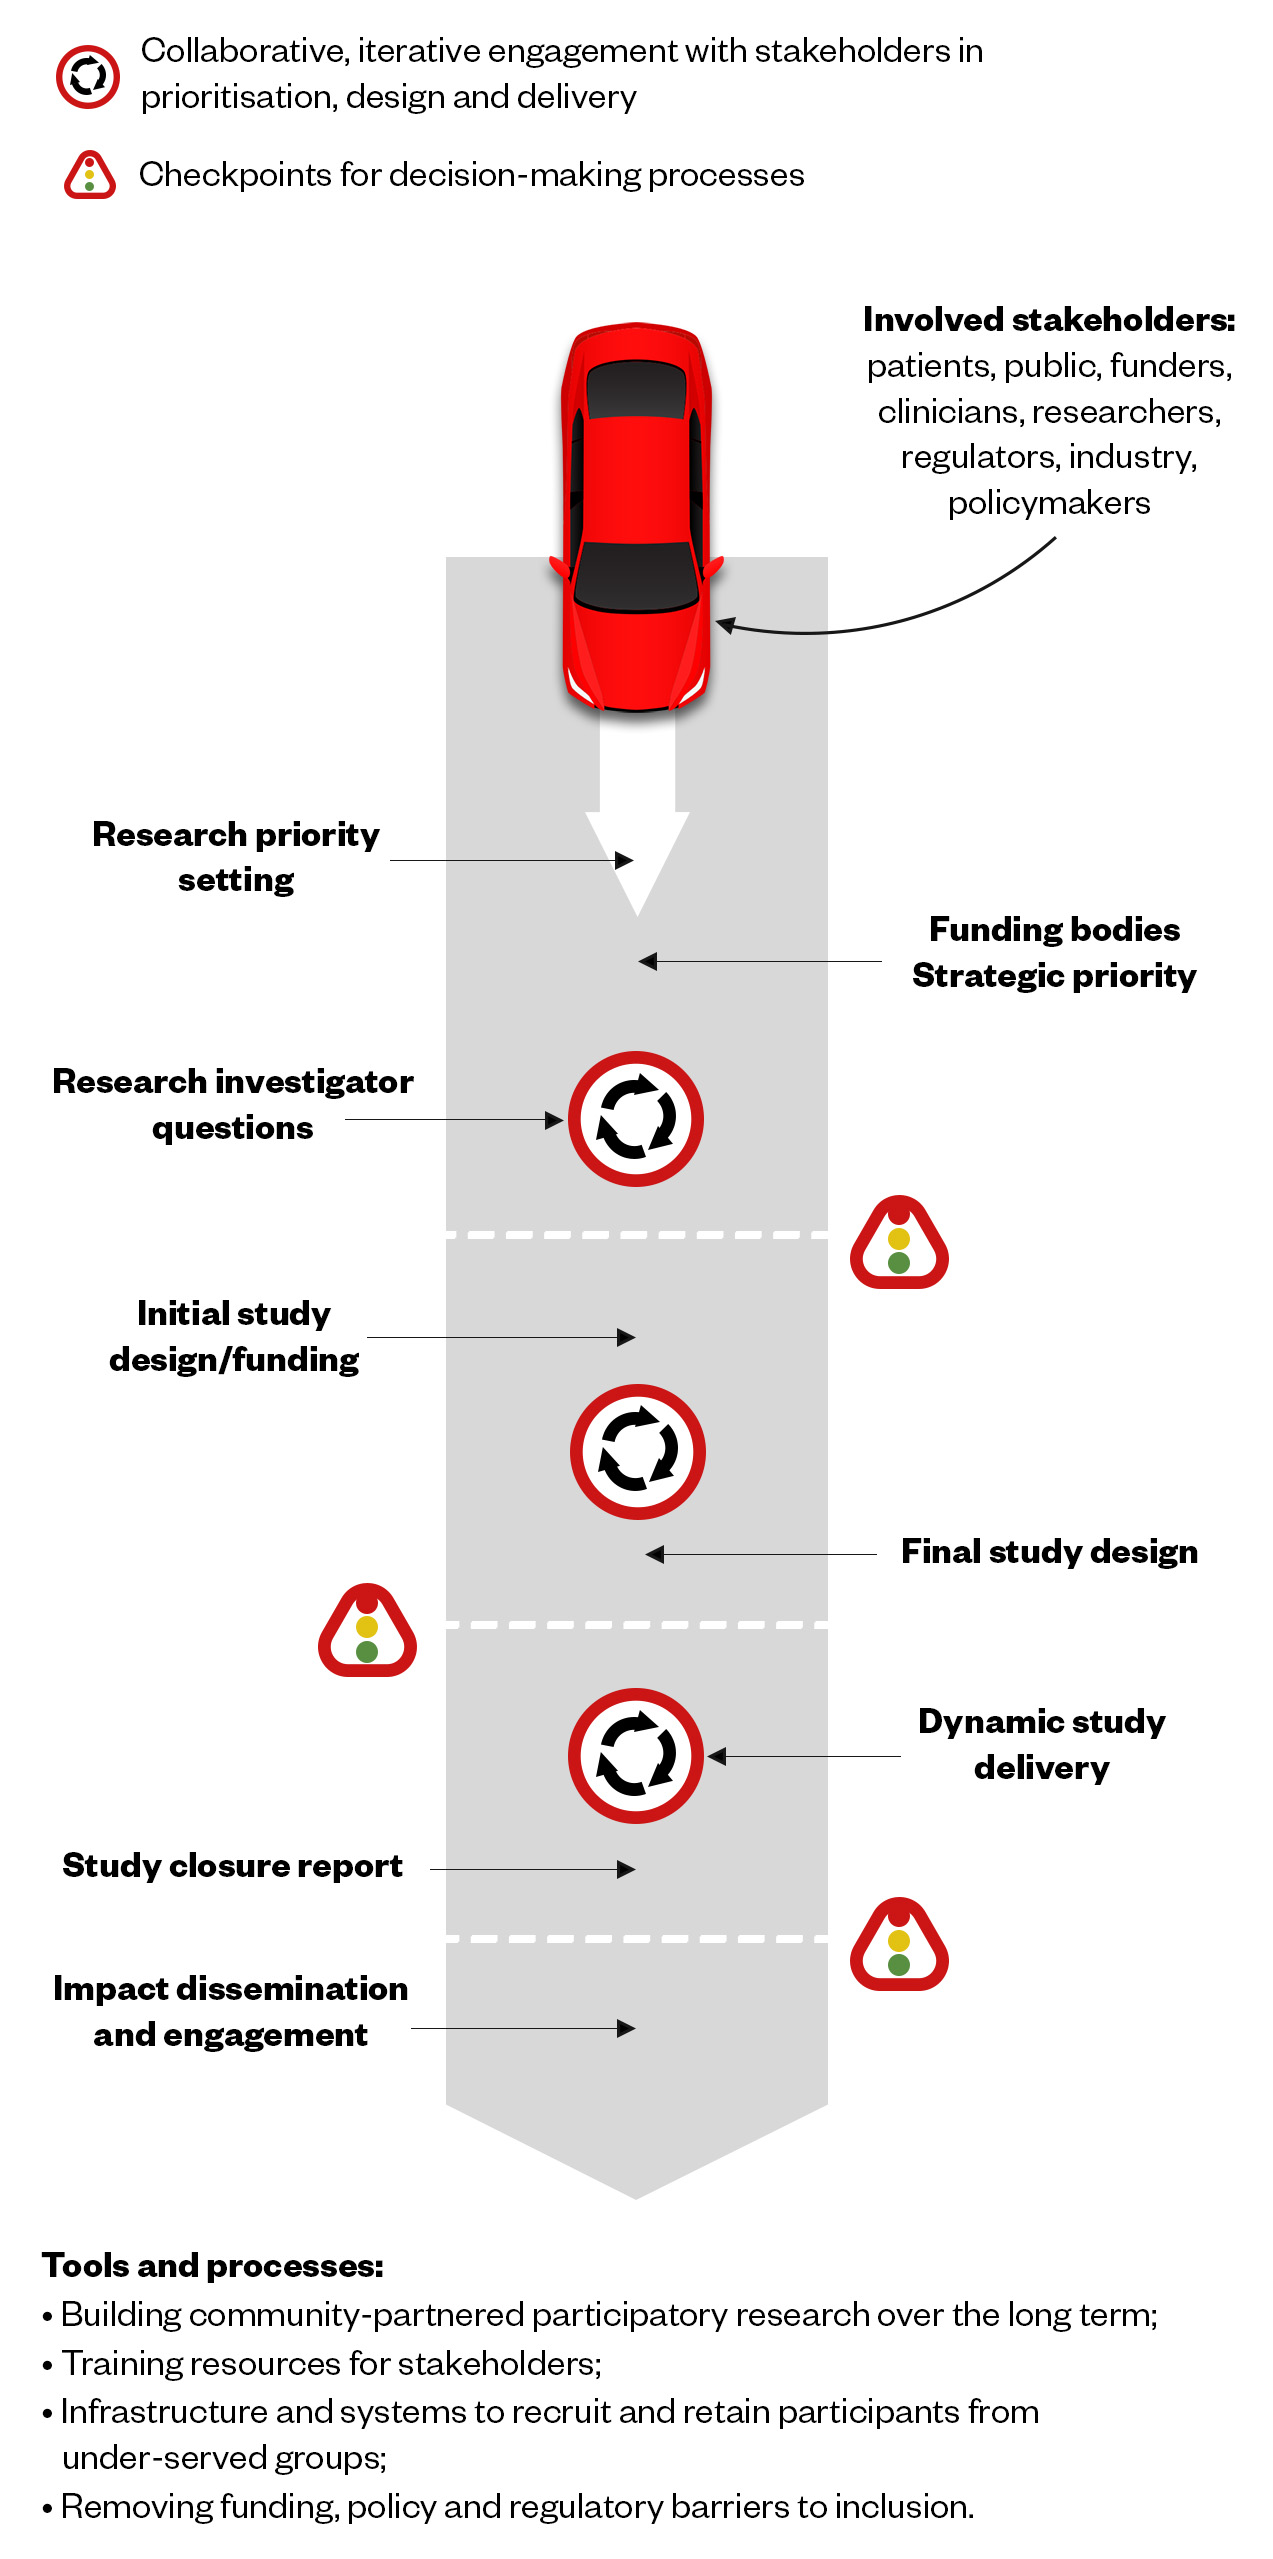 A road-map diagram which lists the stakeholders involved in or affected by outputs from the INCLUDE programme: Patients, public, funders, clinicians, researchers, regulators, industry, policymakers. It also describes the potential points of intervention/processes, in sequential order: Research priority setting; Funding bodies Strategic priority; Research investigator questions; Initial study design/funding; Final study design; Dynamic study delivery; Study closure report; Impact dissemination and engagement. These represent key points for considering inclusion of under-served groups over the life course of the study. Processes are embedded in the context of ethics and regulatory requirements and evolving digital technology developments.